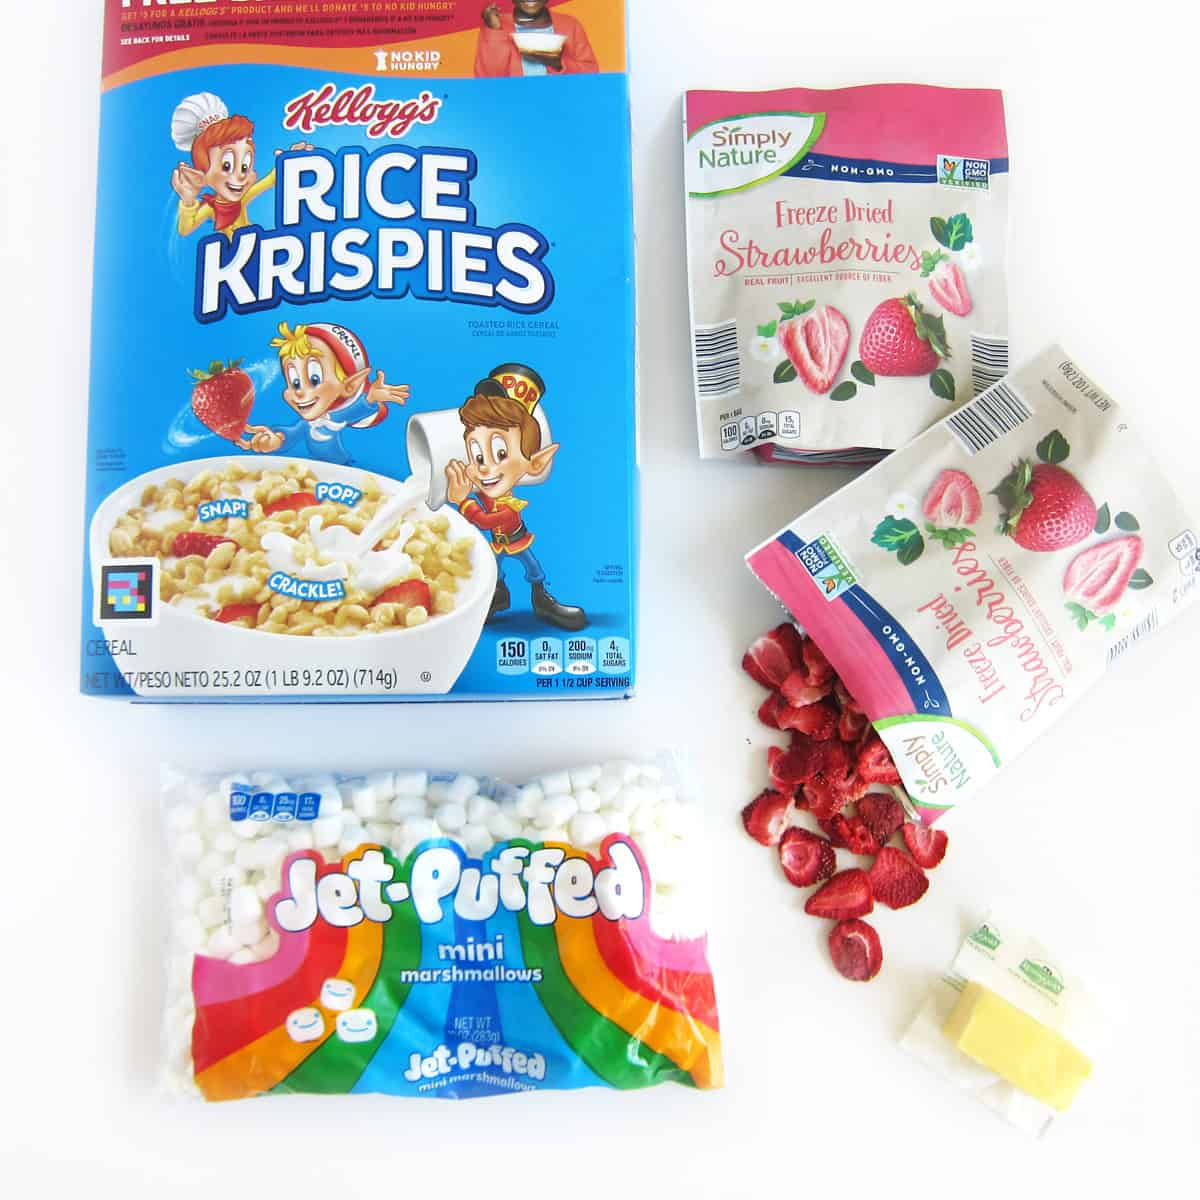 strawberry rice krispie treats ingredients including Rice Krispies Cereal. freeze dried strawberries, marshmallows, and butter.